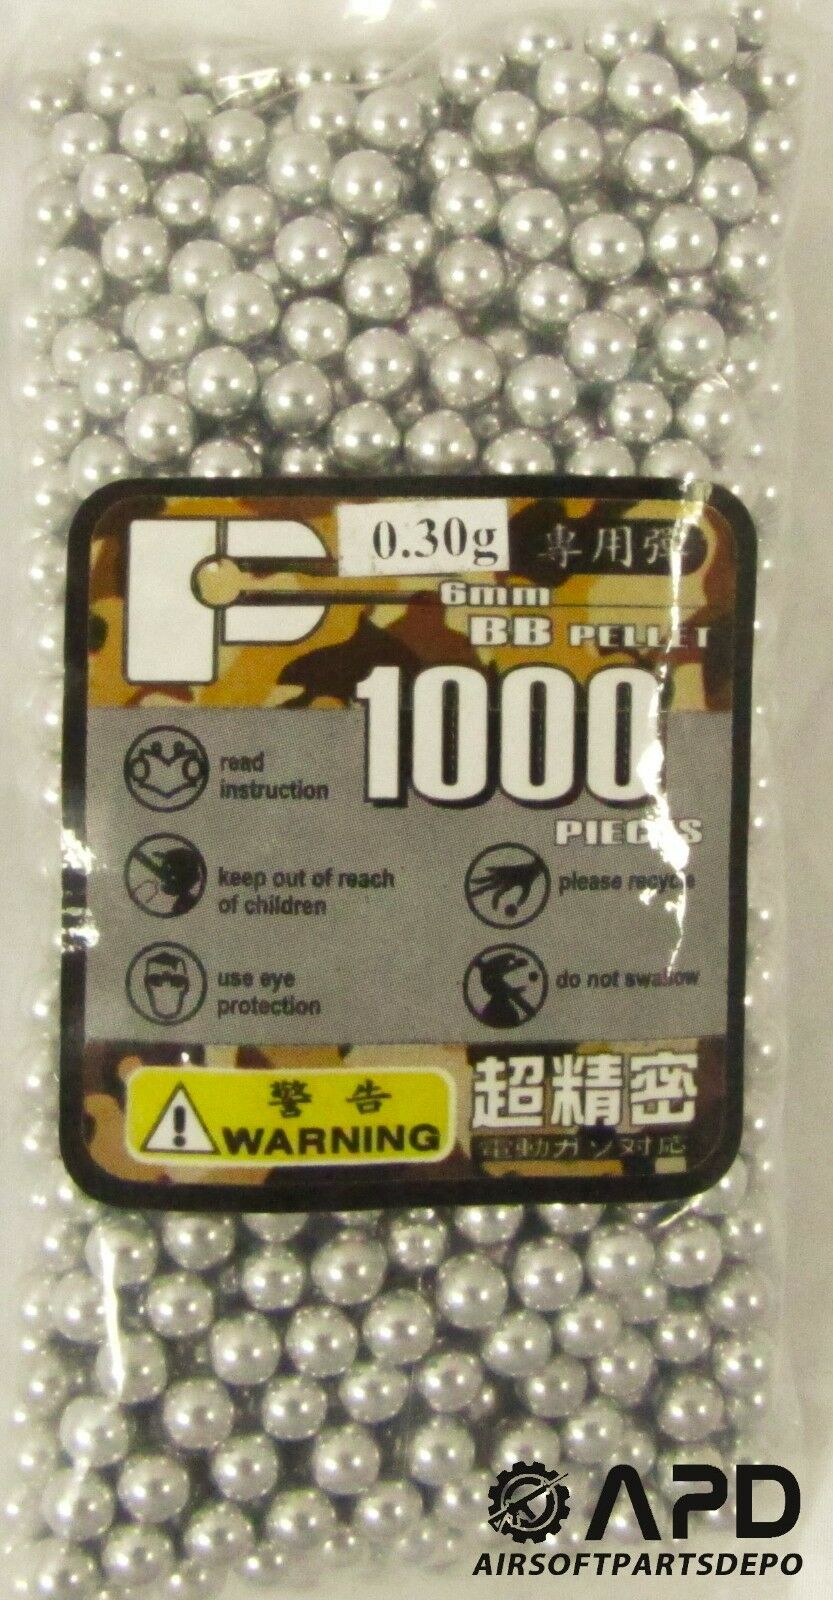 P-force Metallic .30g 6mm 1000 Aluminum High Quality Competition Grade Bbs